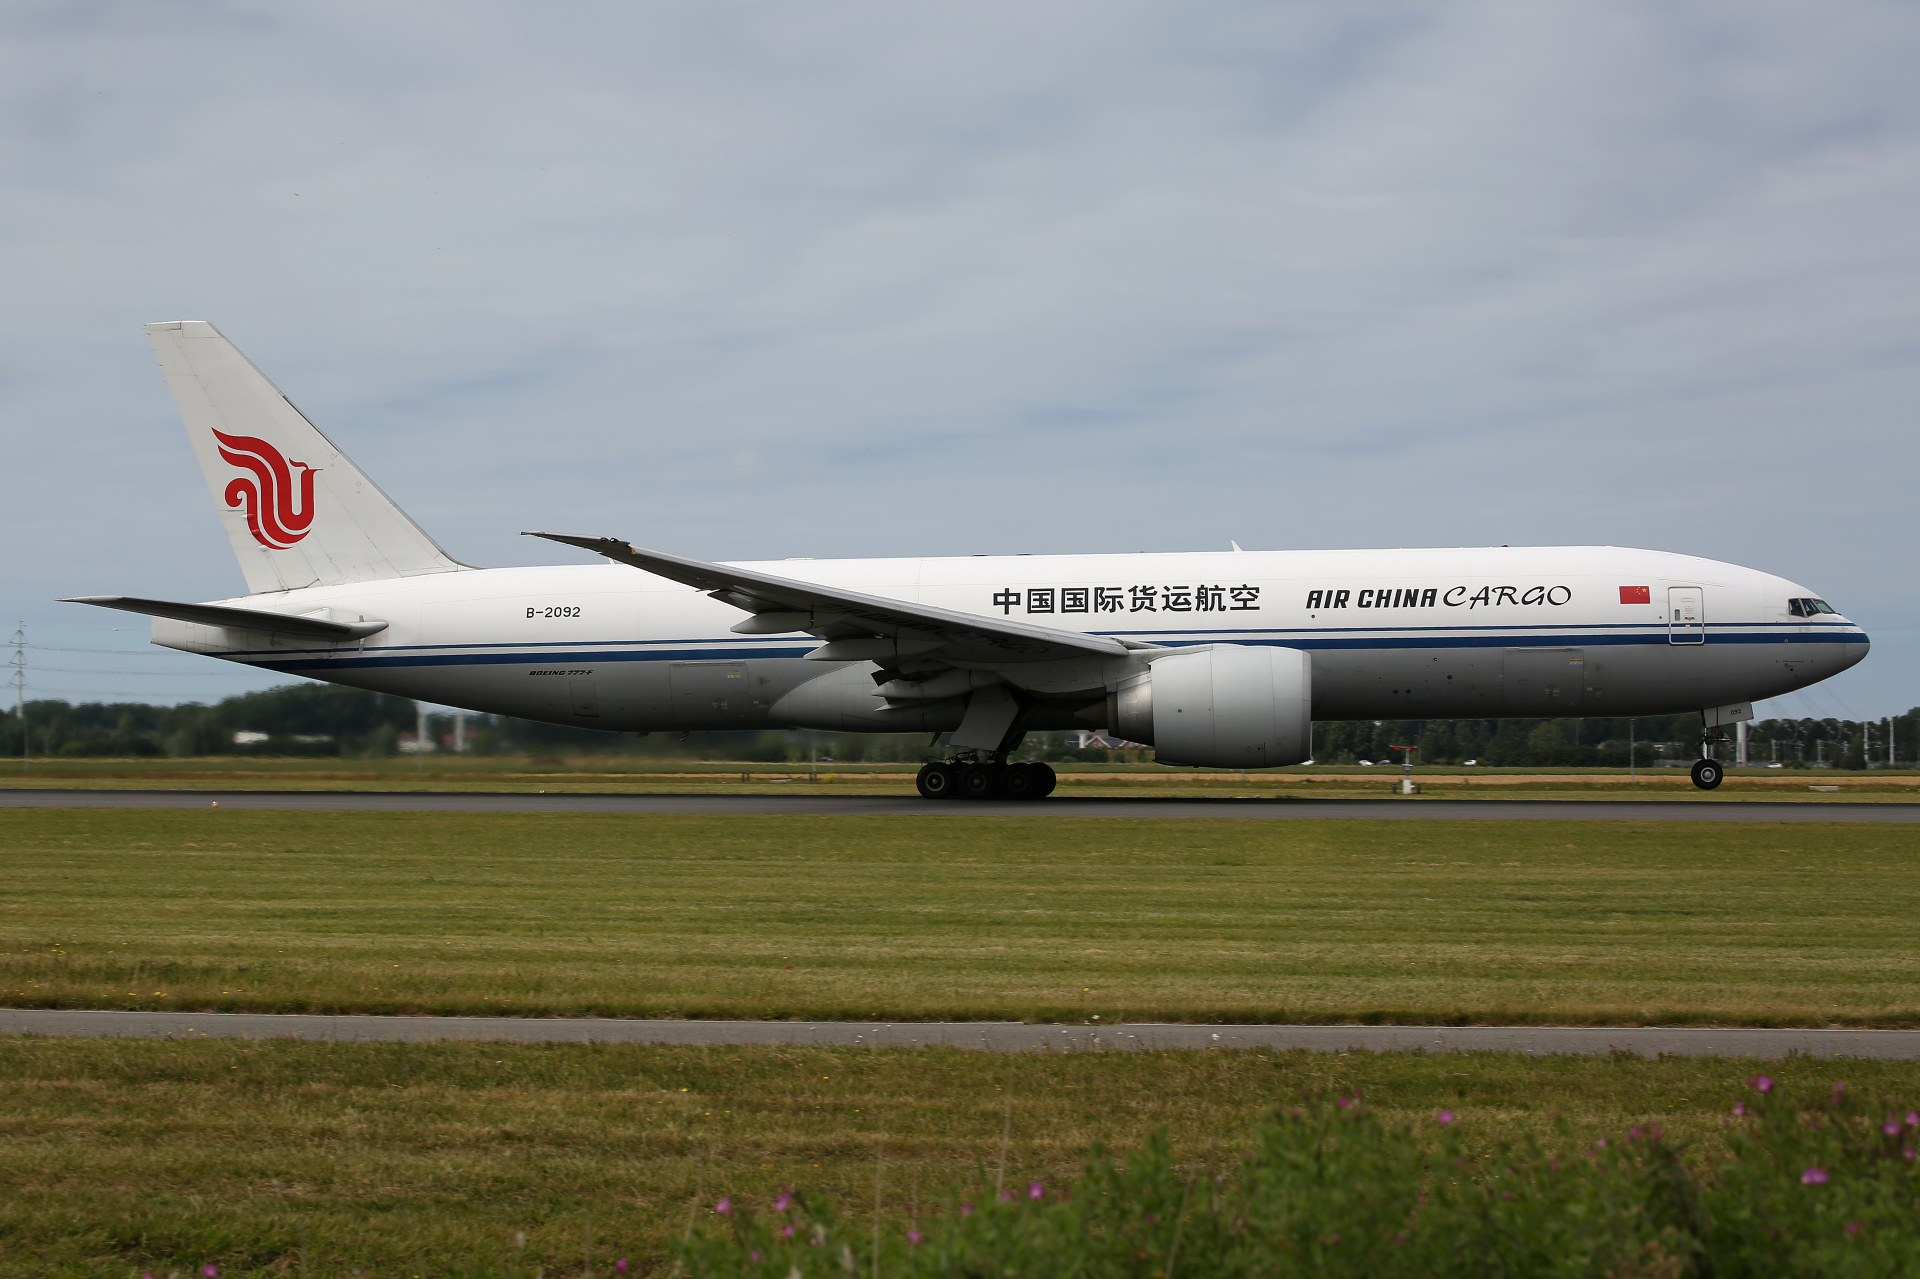 B-2092, Air China Cargo (Aircraft » Schiphol Spotting » Boeing 777F)